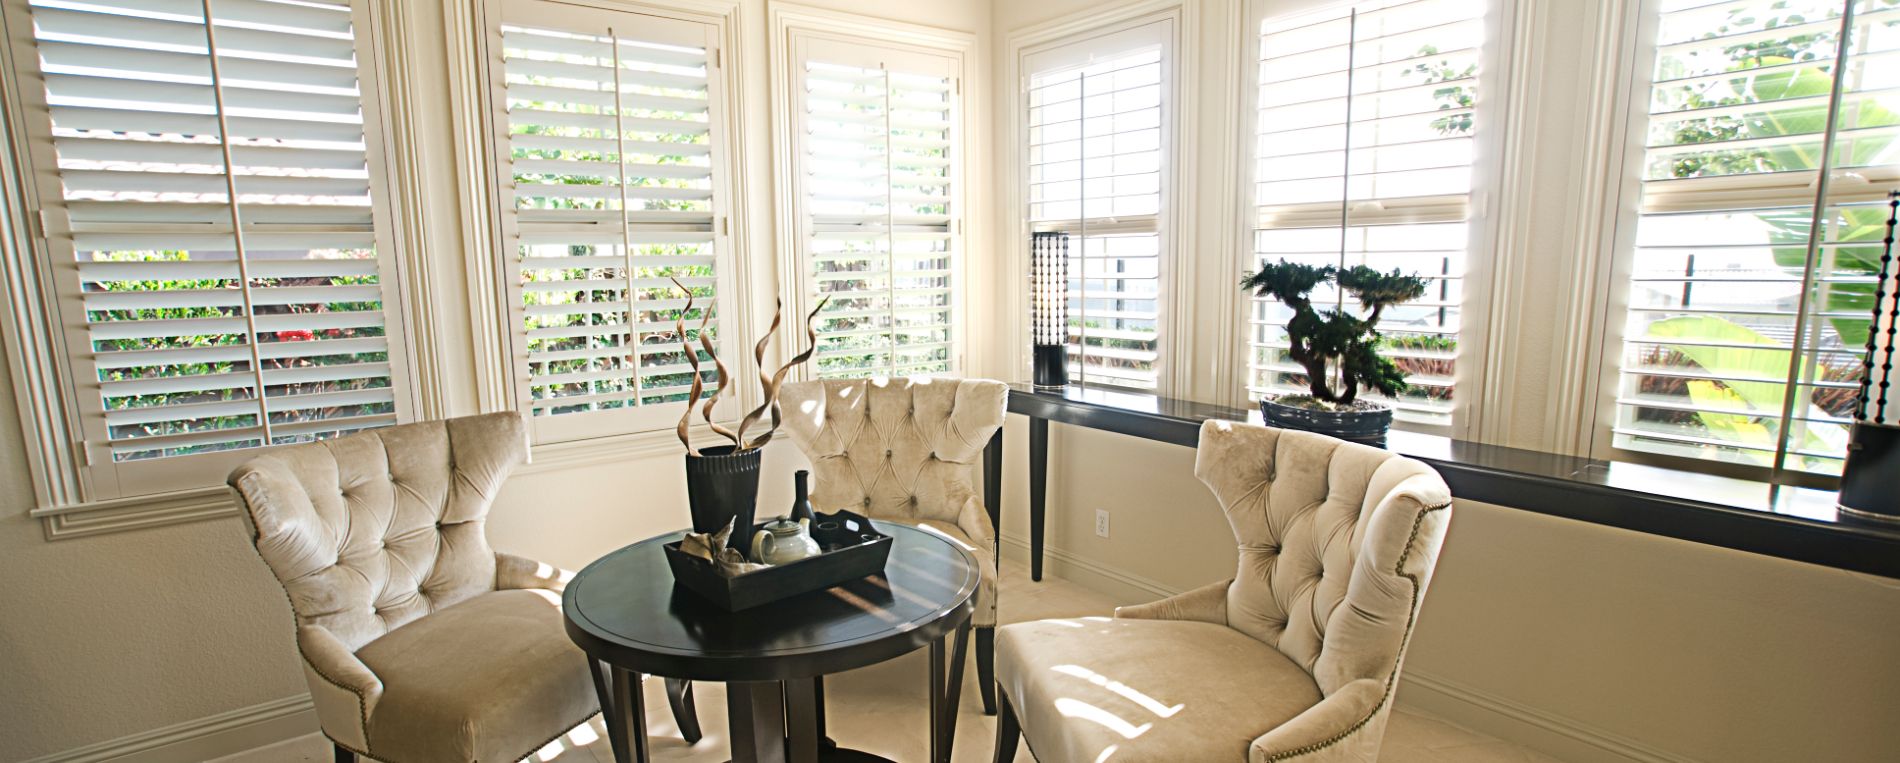 A view at a sitting room with window shutters